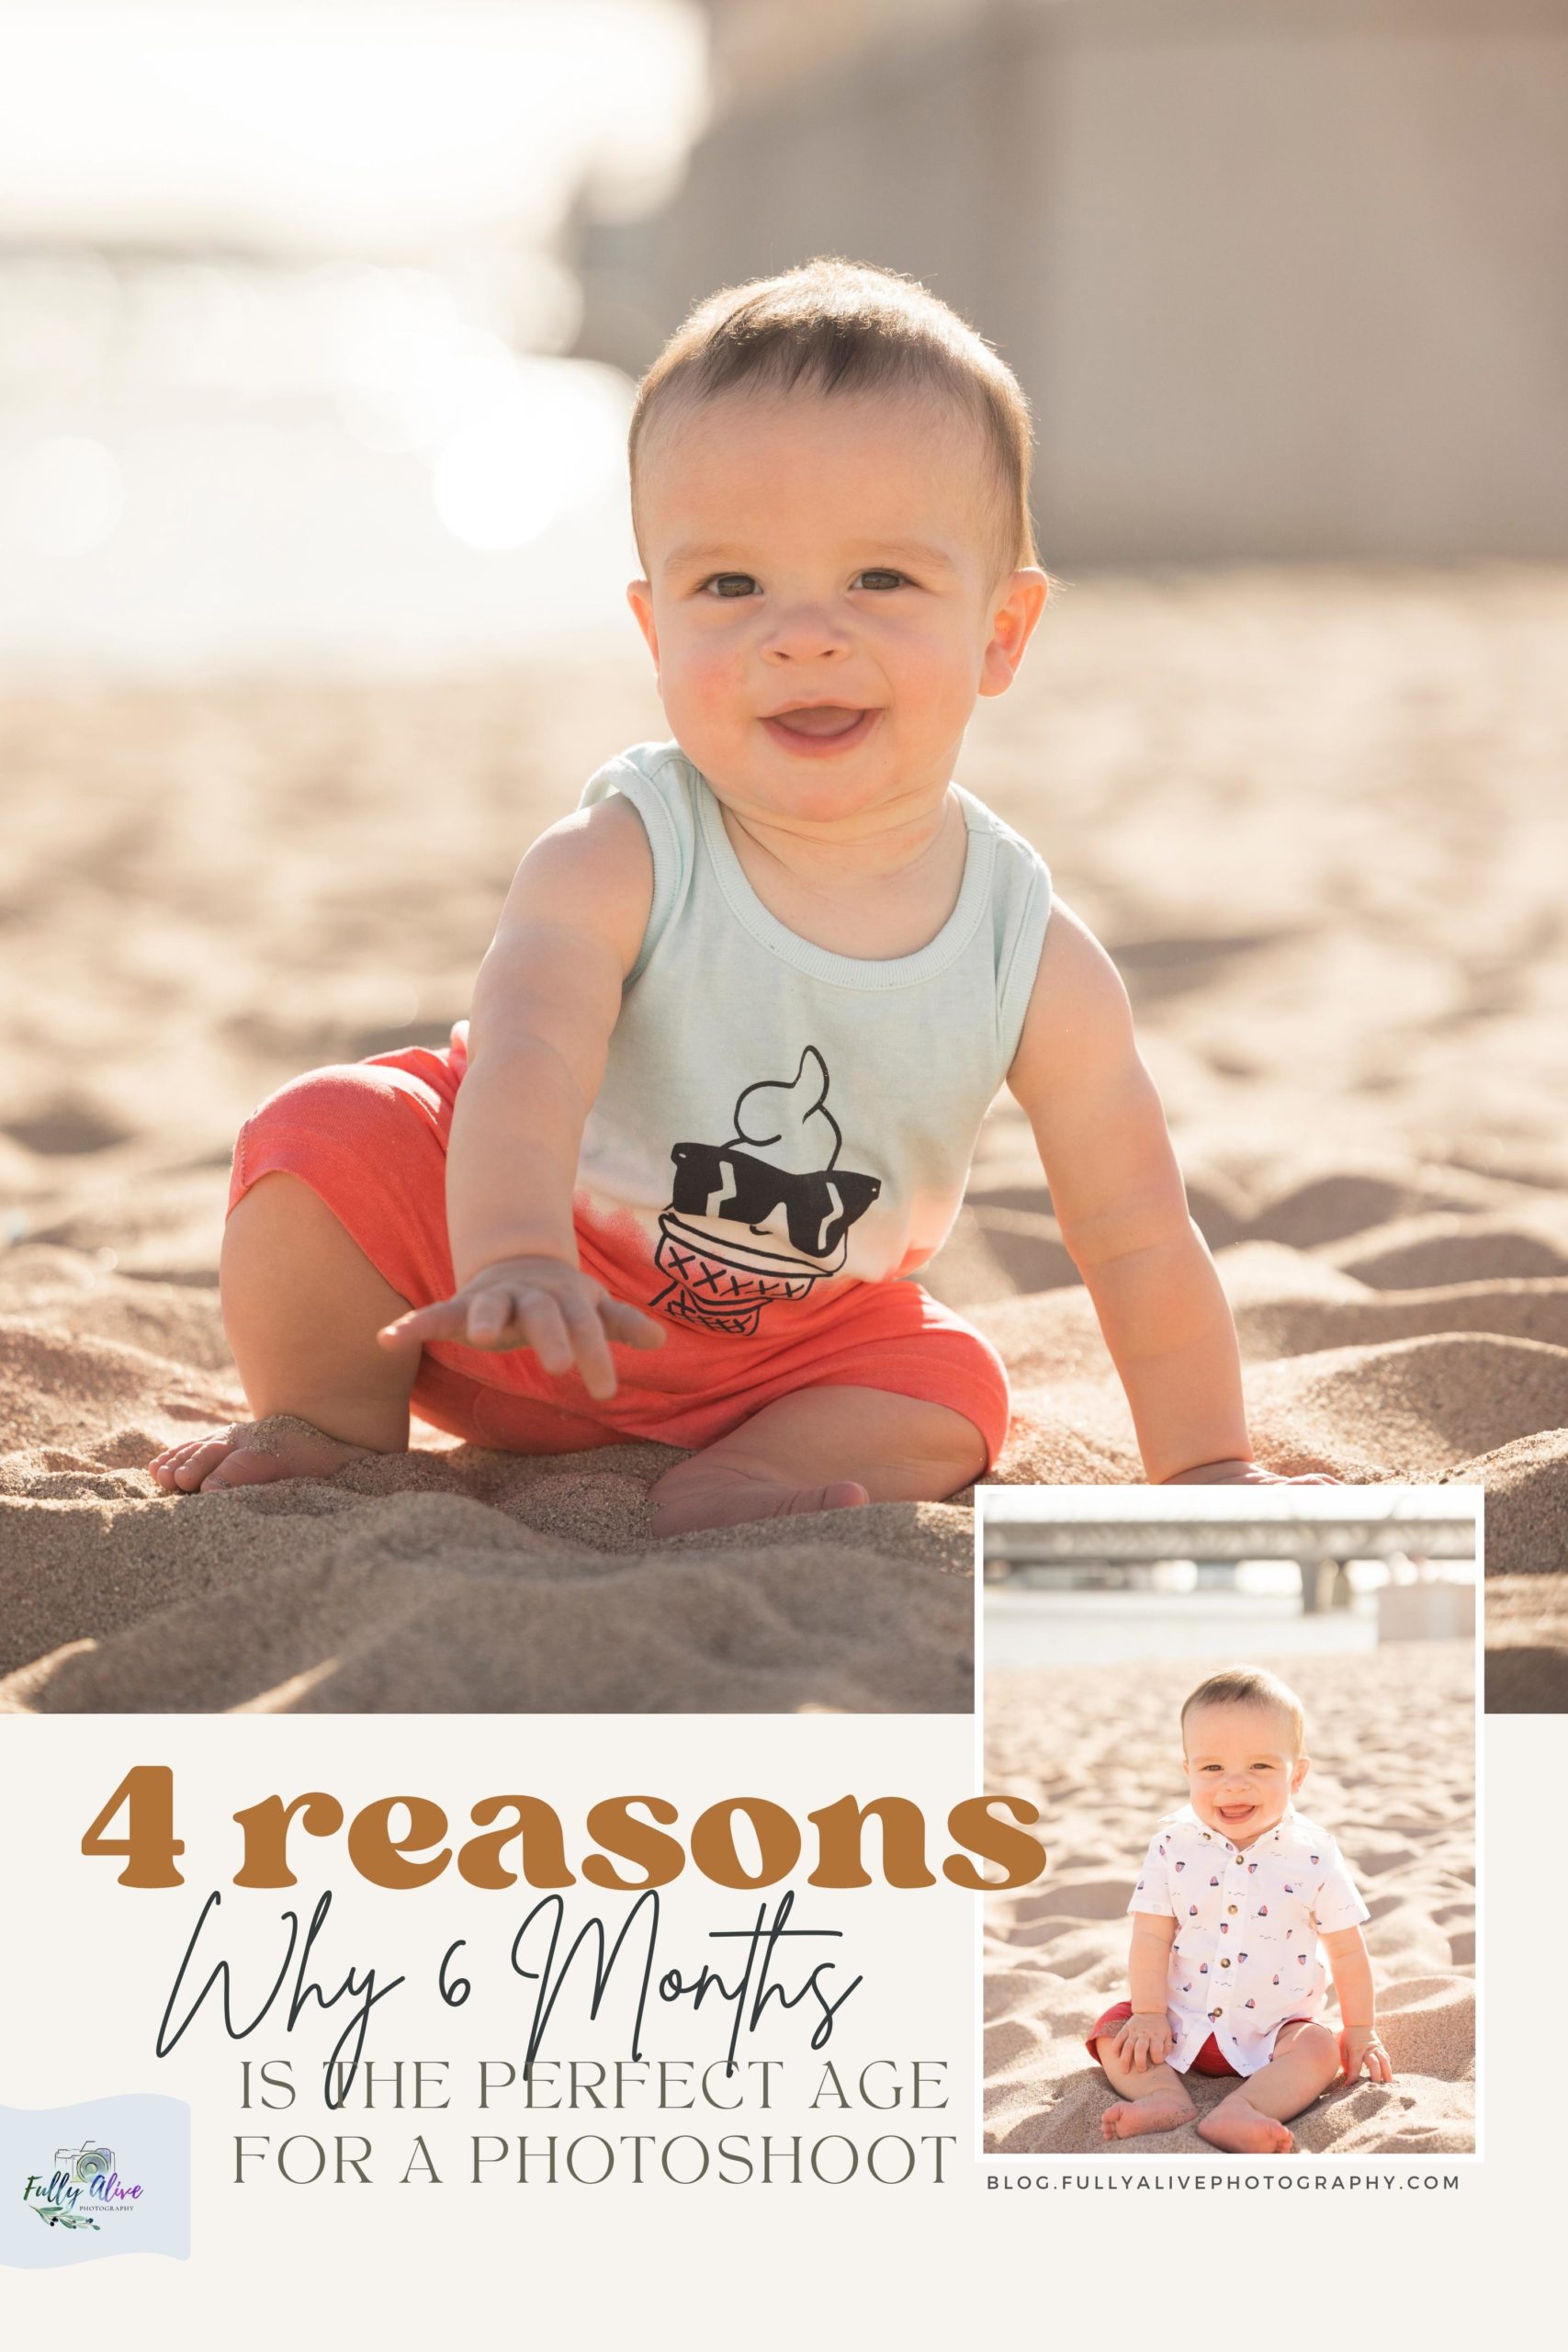 4 Reasons Why 6 Months Is The Perfect Age For A Photoshoot